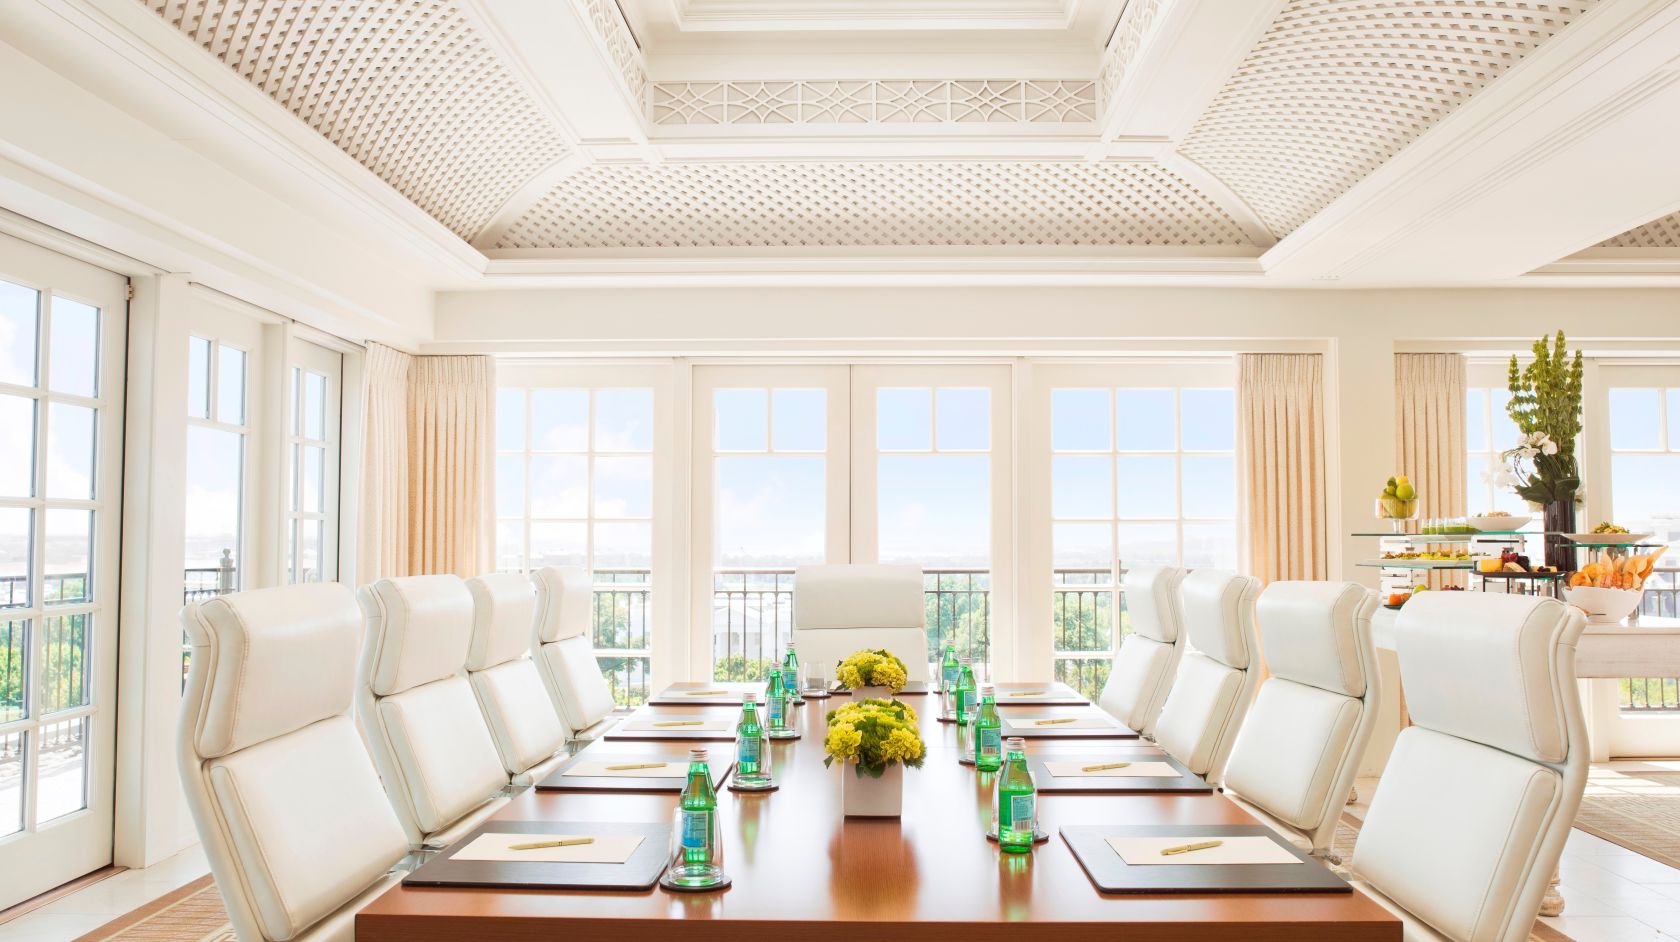 John Adams meeting room in The Hay-Adams Hotel with Washington DC views and white leather chairs surrounding a set wooden board table